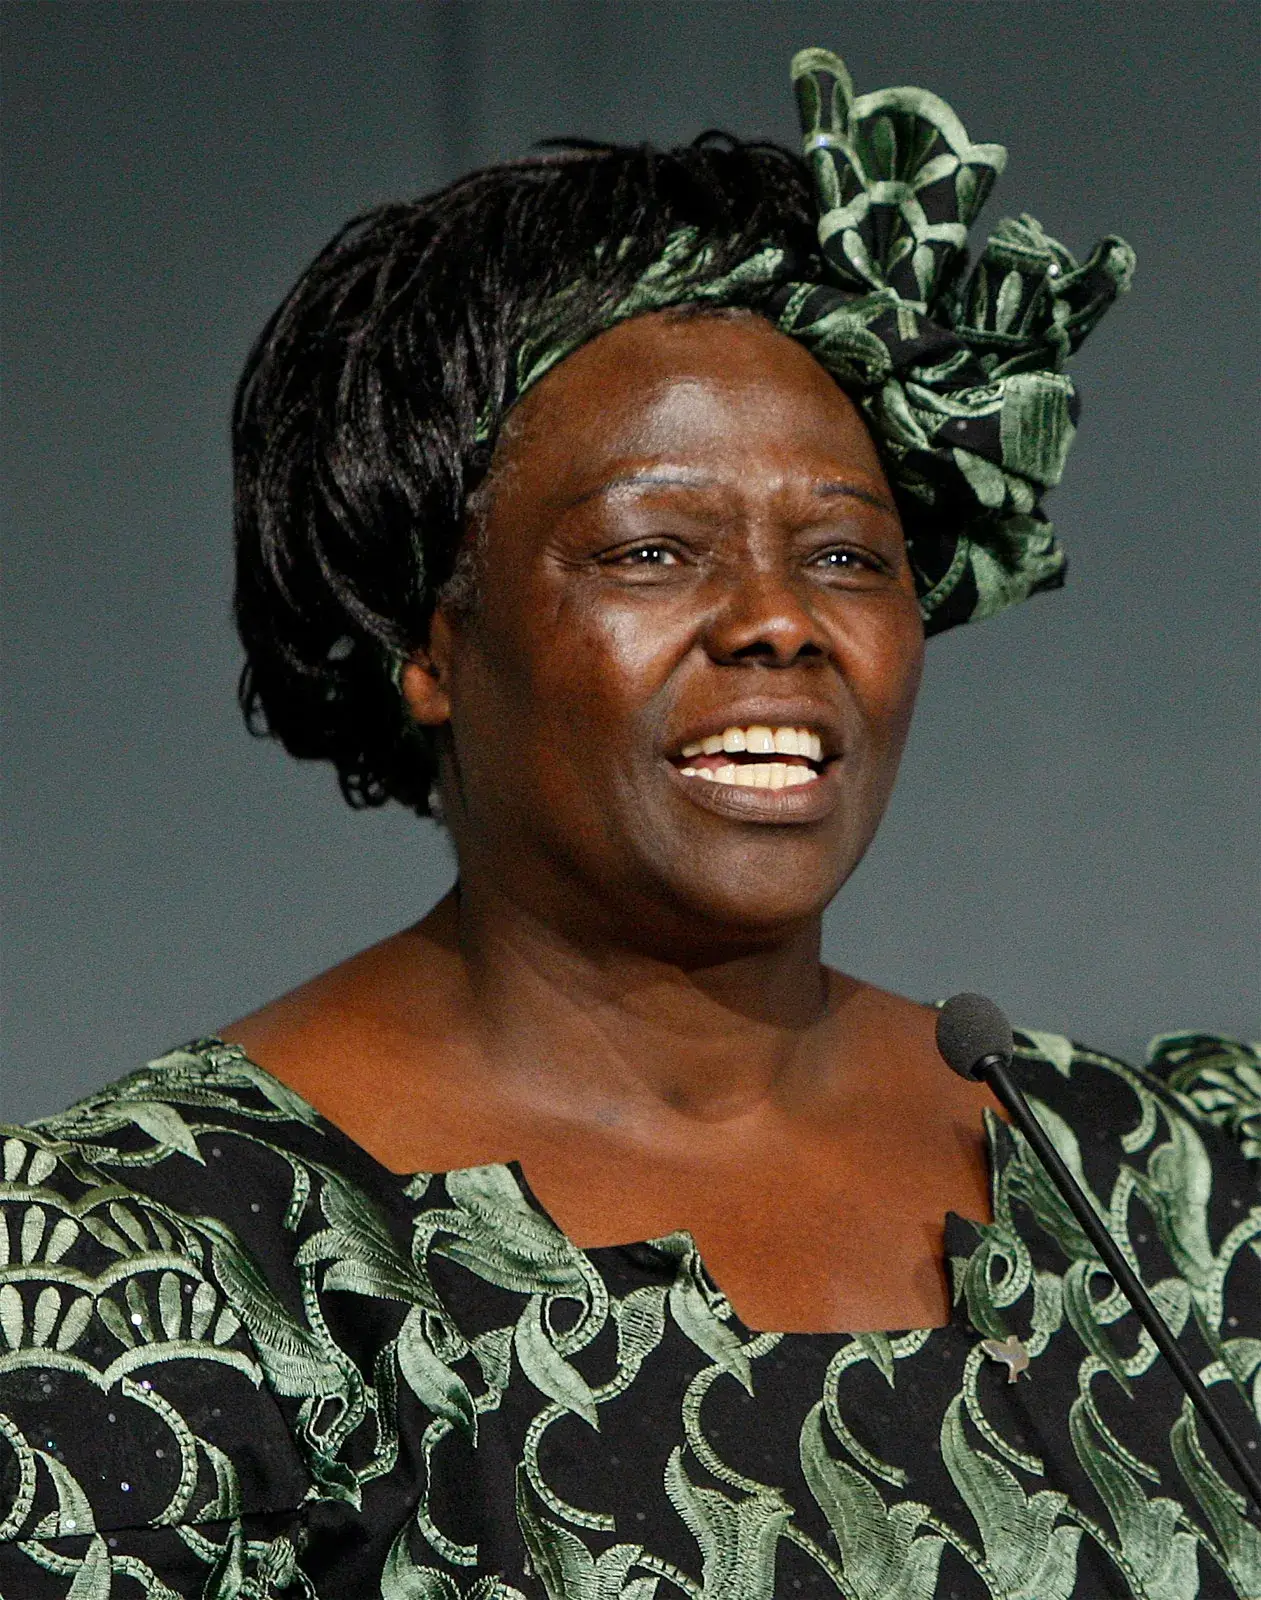 WANGARI MUTA MAATHAI (1940-2011) – The Most Prominent Environmental Activist in Africa and The 2004 Recipient Of The Alfred Nobel Peace Prize - African Leaders Magazine 